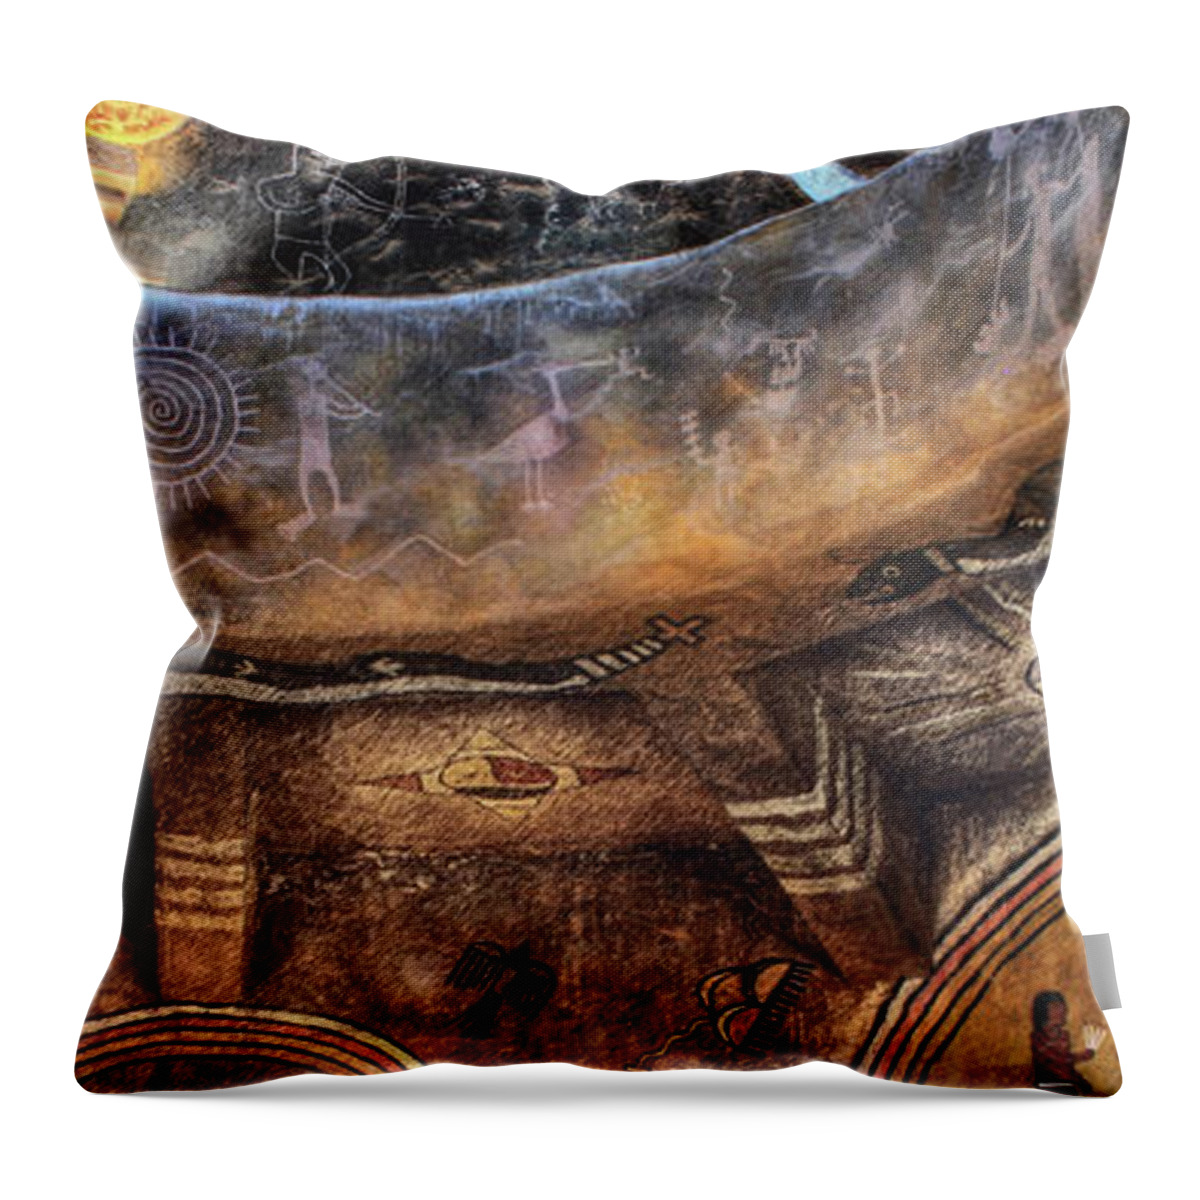 Watch Tower Throw Pillow featuring the photograph Grand Canyon Tower Wall Abstract No 3 by Wayne King